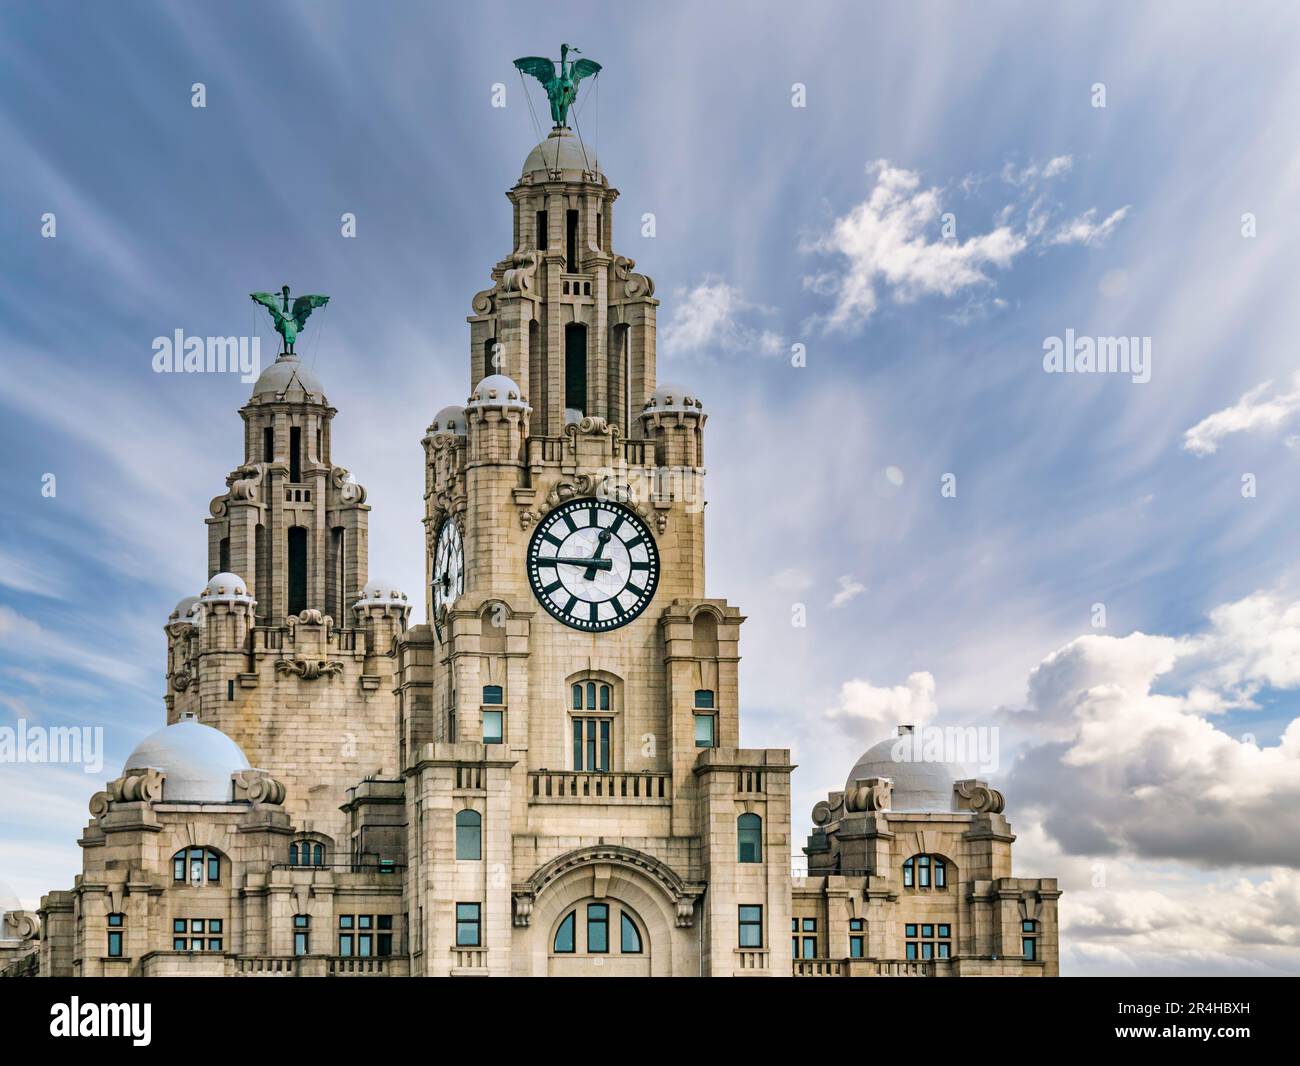 Close up view of clock towers of Royal Liver building with cormorant Liver Birds and UK's largest clocks, Pier Head, Liverpool, England, UK Stock Photo